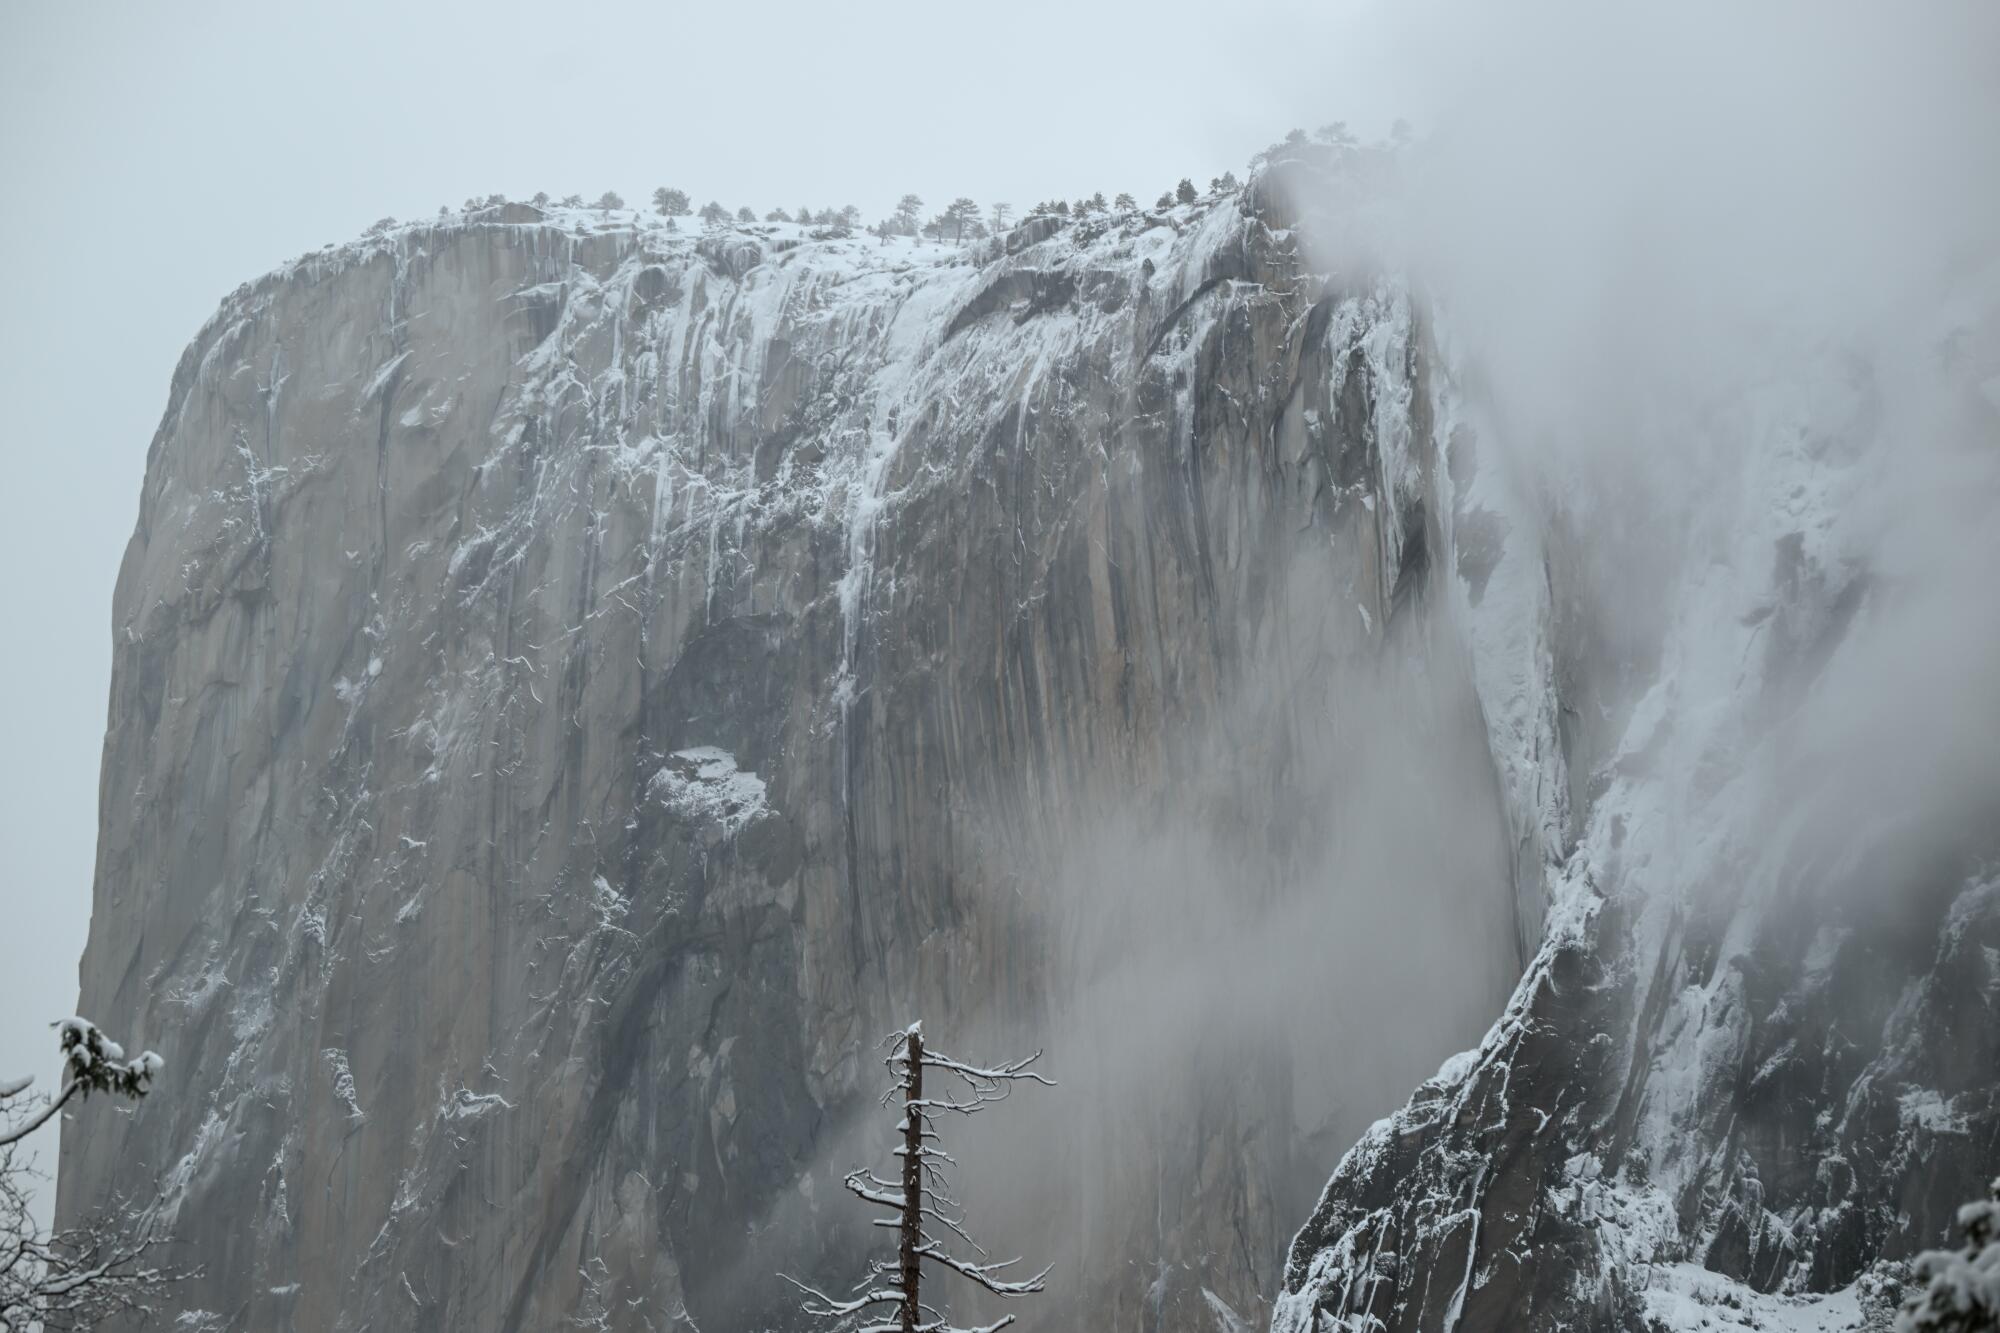 A view of El Capitan shrouded in the clouds inside Yosemite National Park.